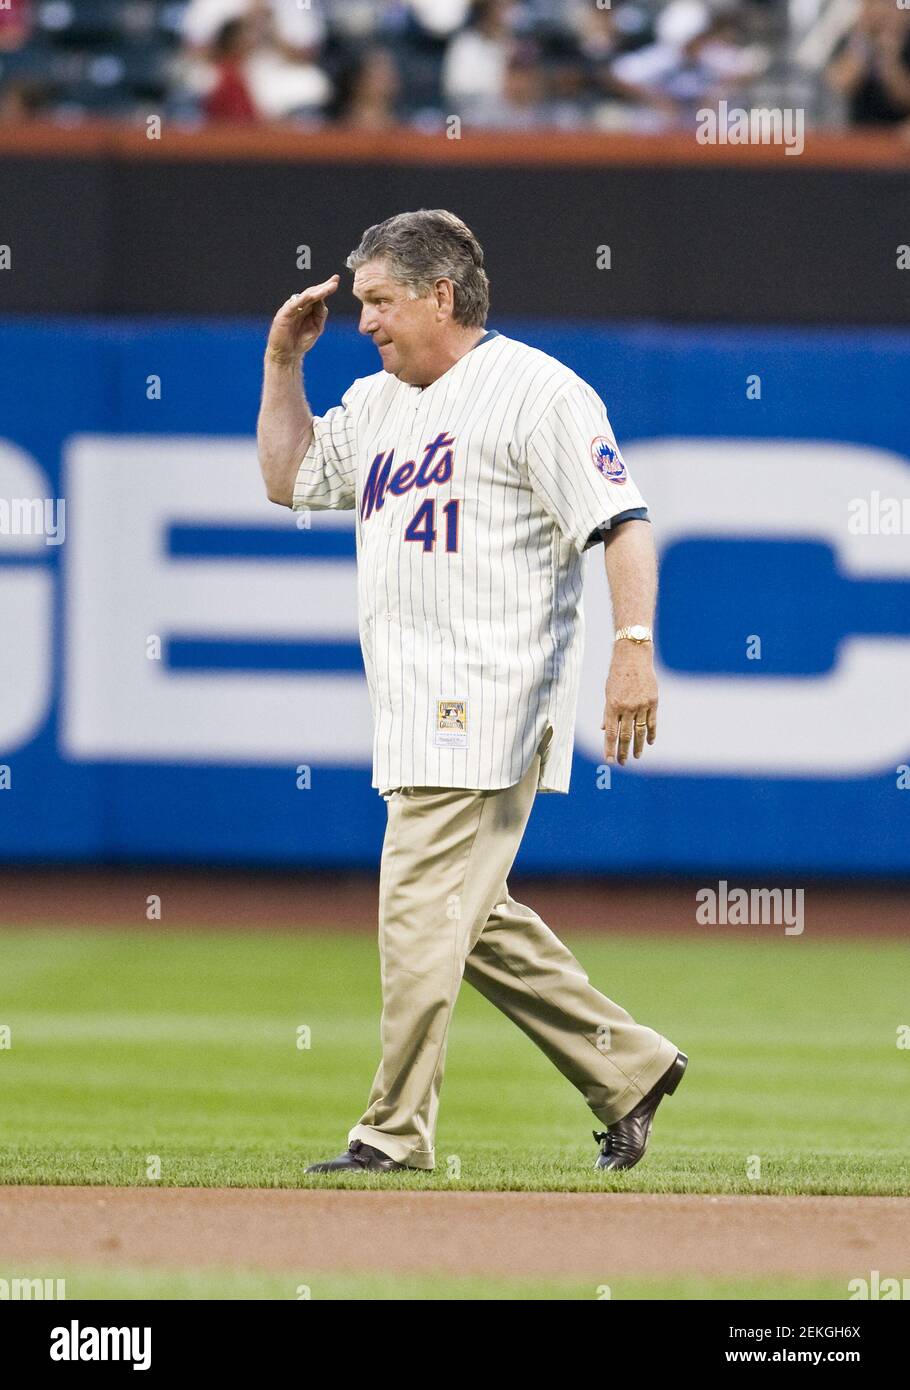 Tom Seaver passed away two years ago today at the age of 75. He